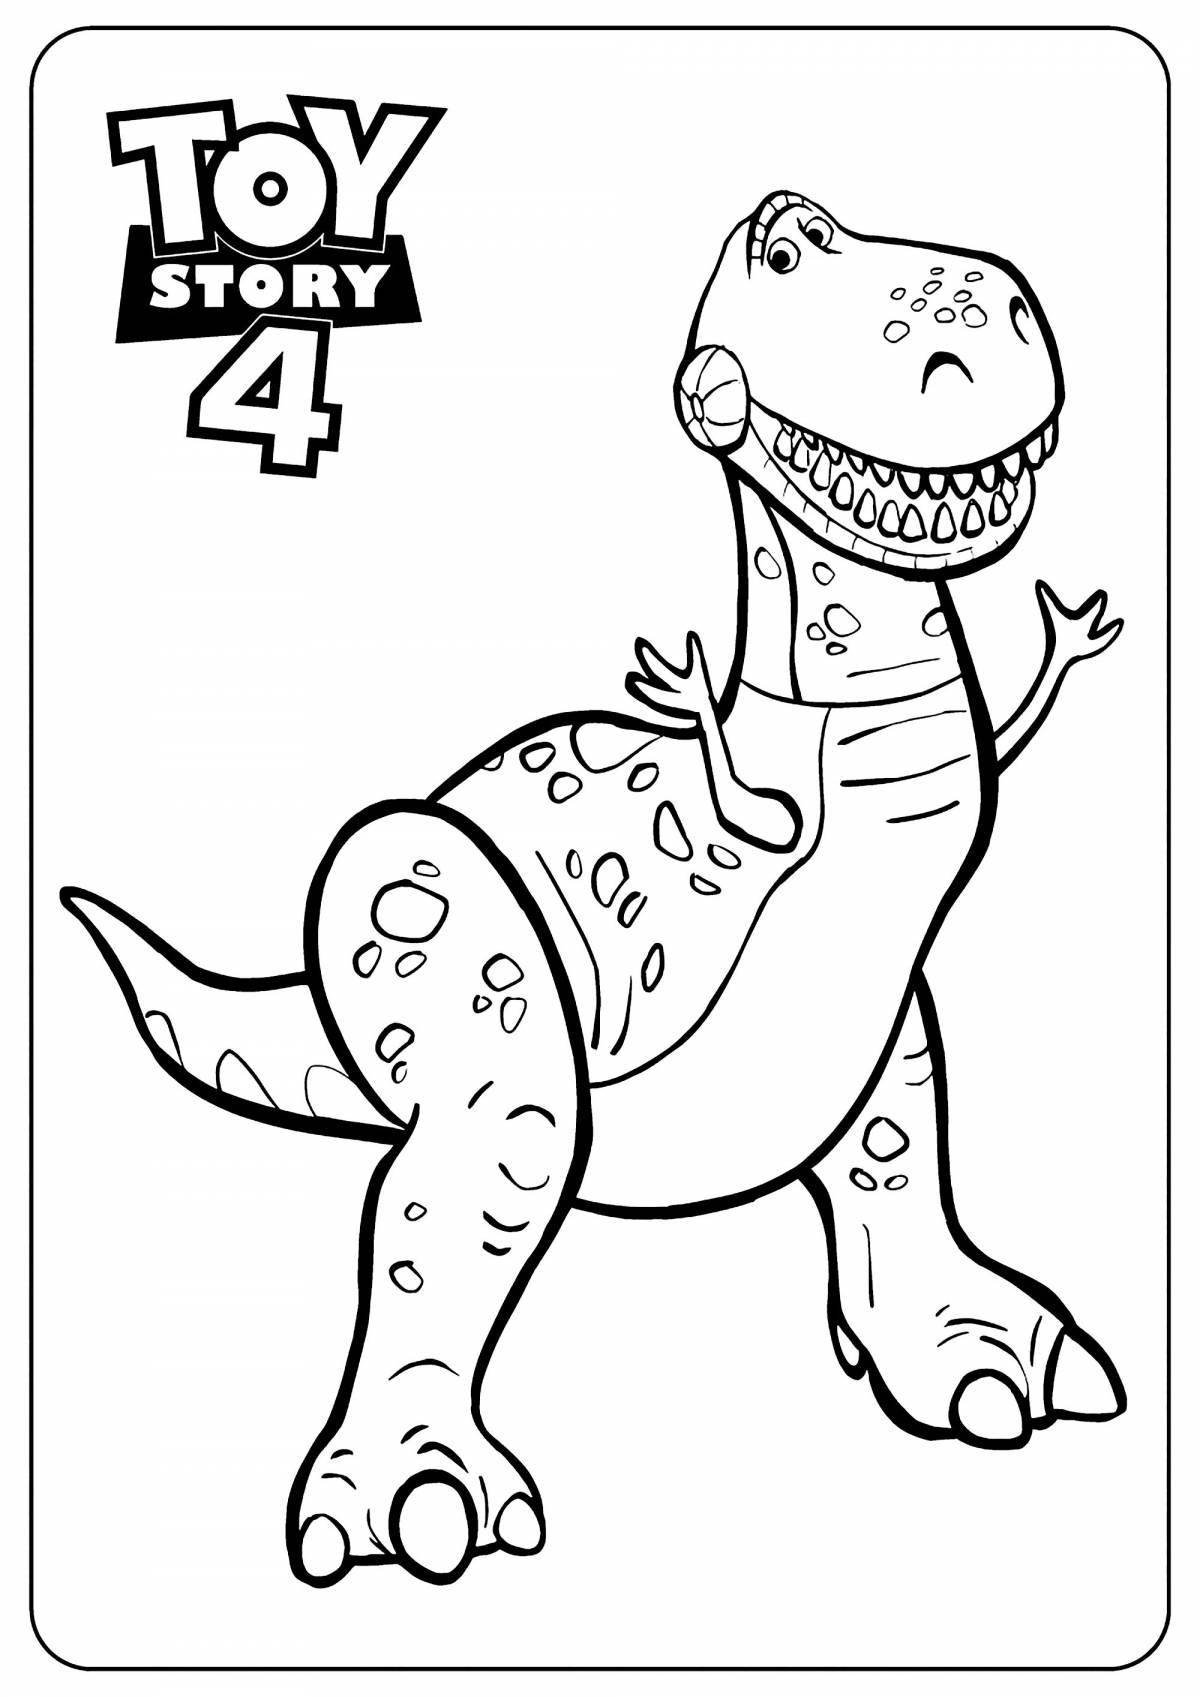 Tarbosaurus adorable truck coloring page